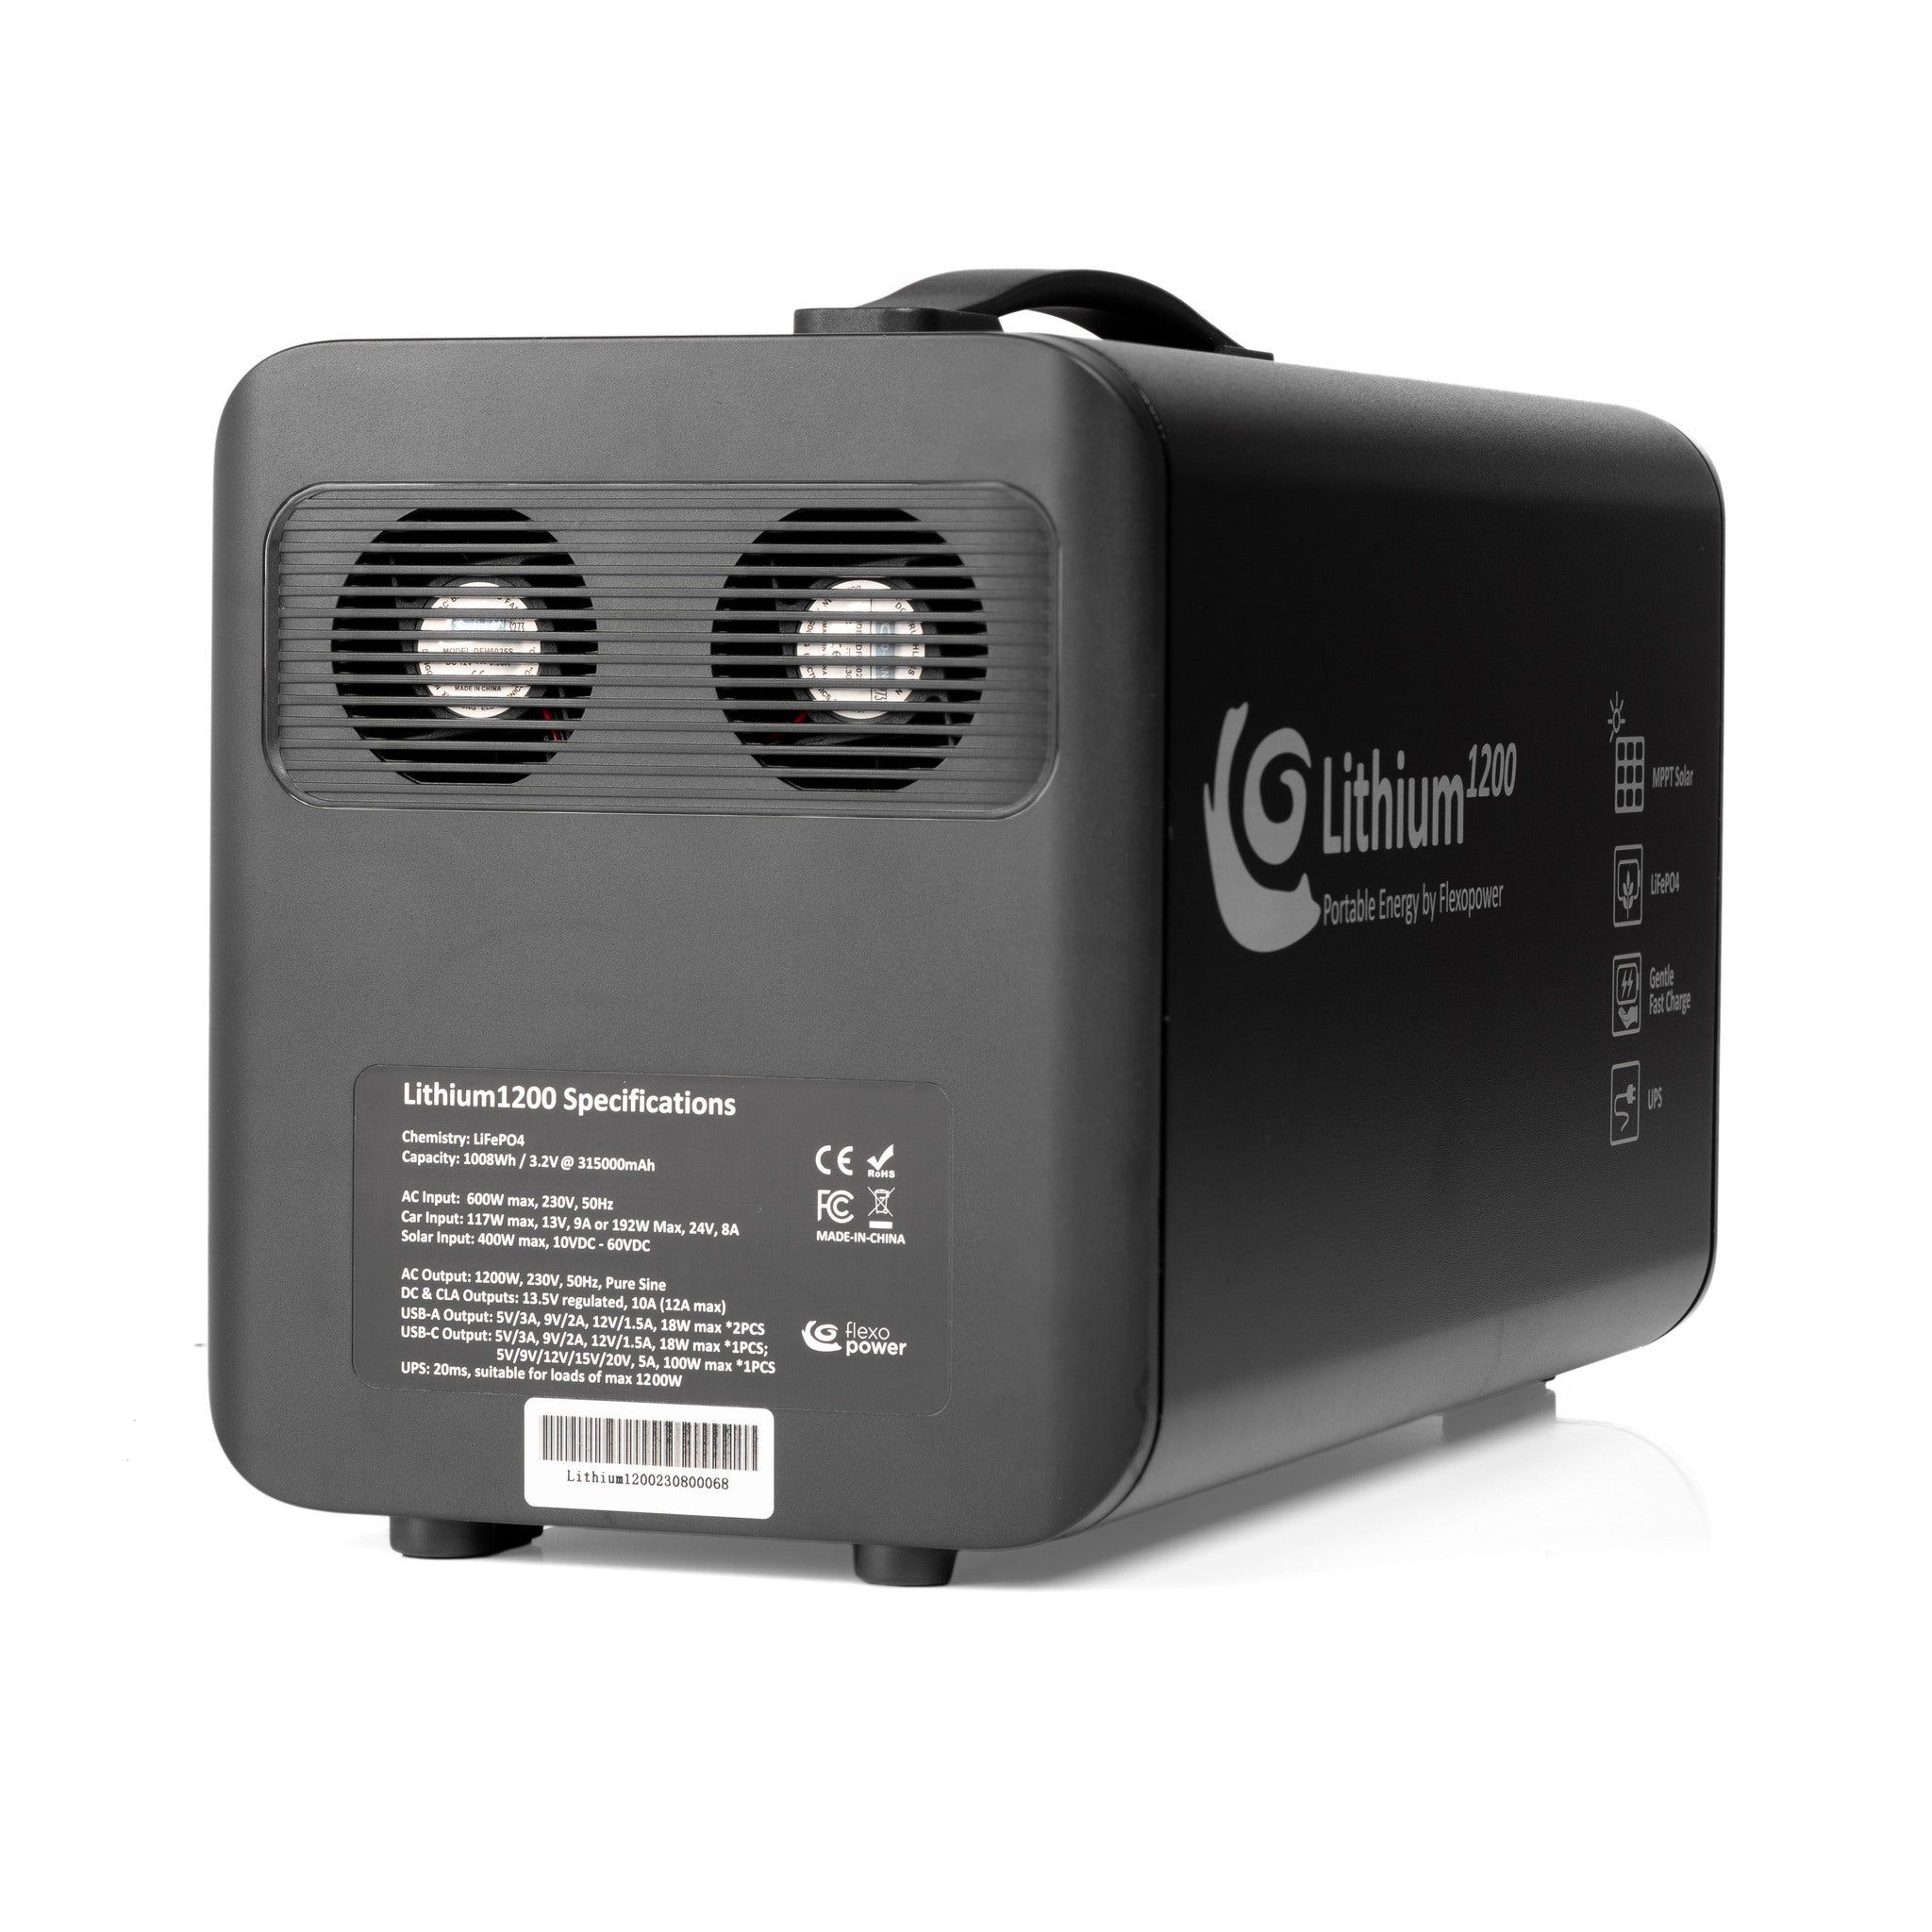 LITHIUM1200 PORTABLE POWER STATION BY FLEXOPOWER